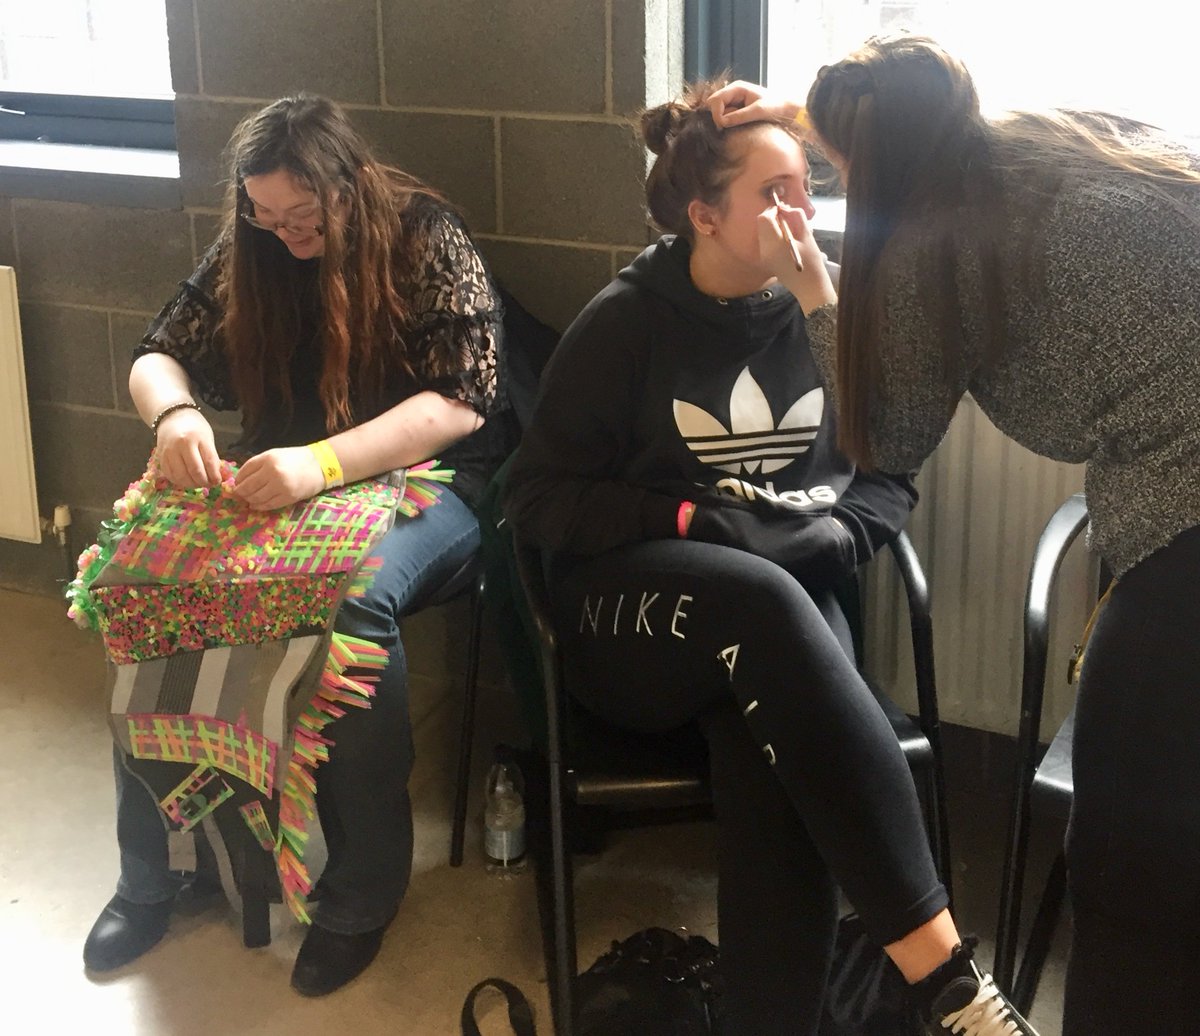 @dunoongrammar1 Junk Kouture pupils getting creative at the Helix in Dublin. Competition day is here!